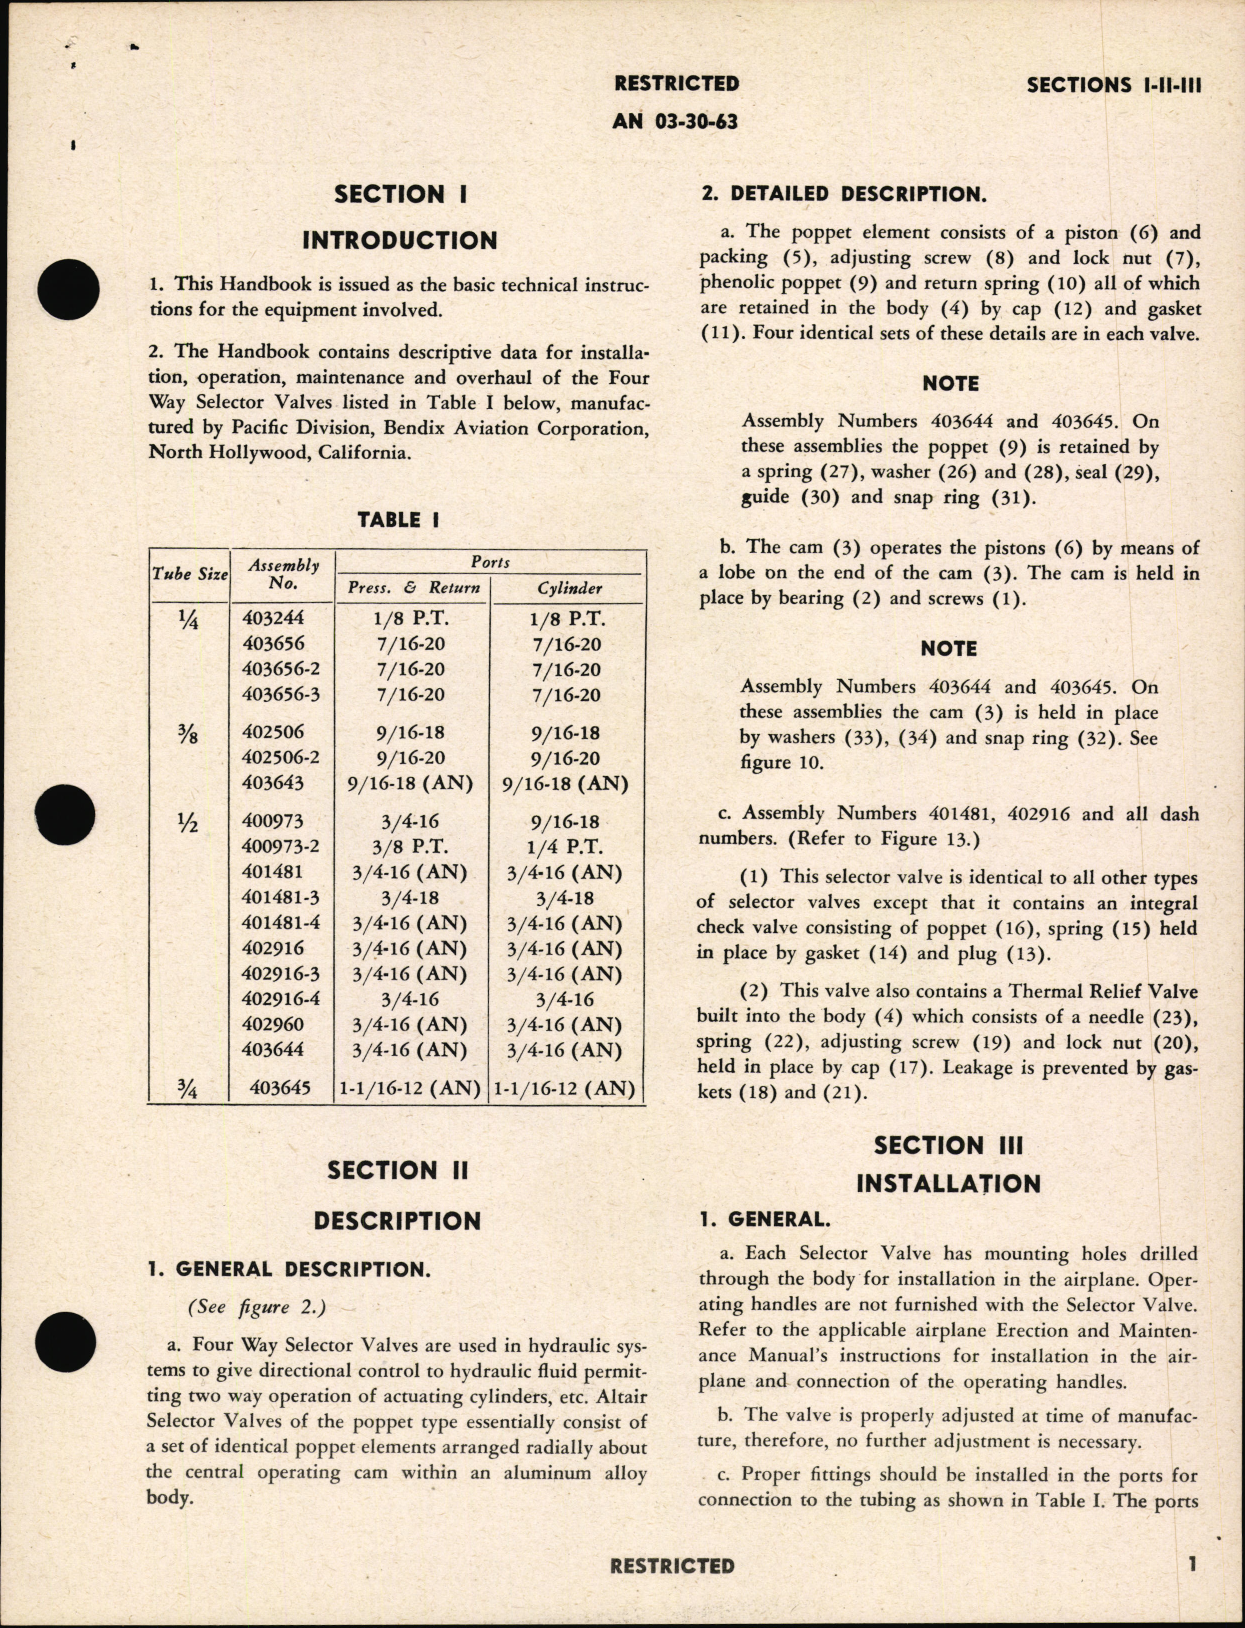 Sample page 5 from AirCorps Library document: Handbook of Instructions With Parts Catalog for Four-Way Selector Valves